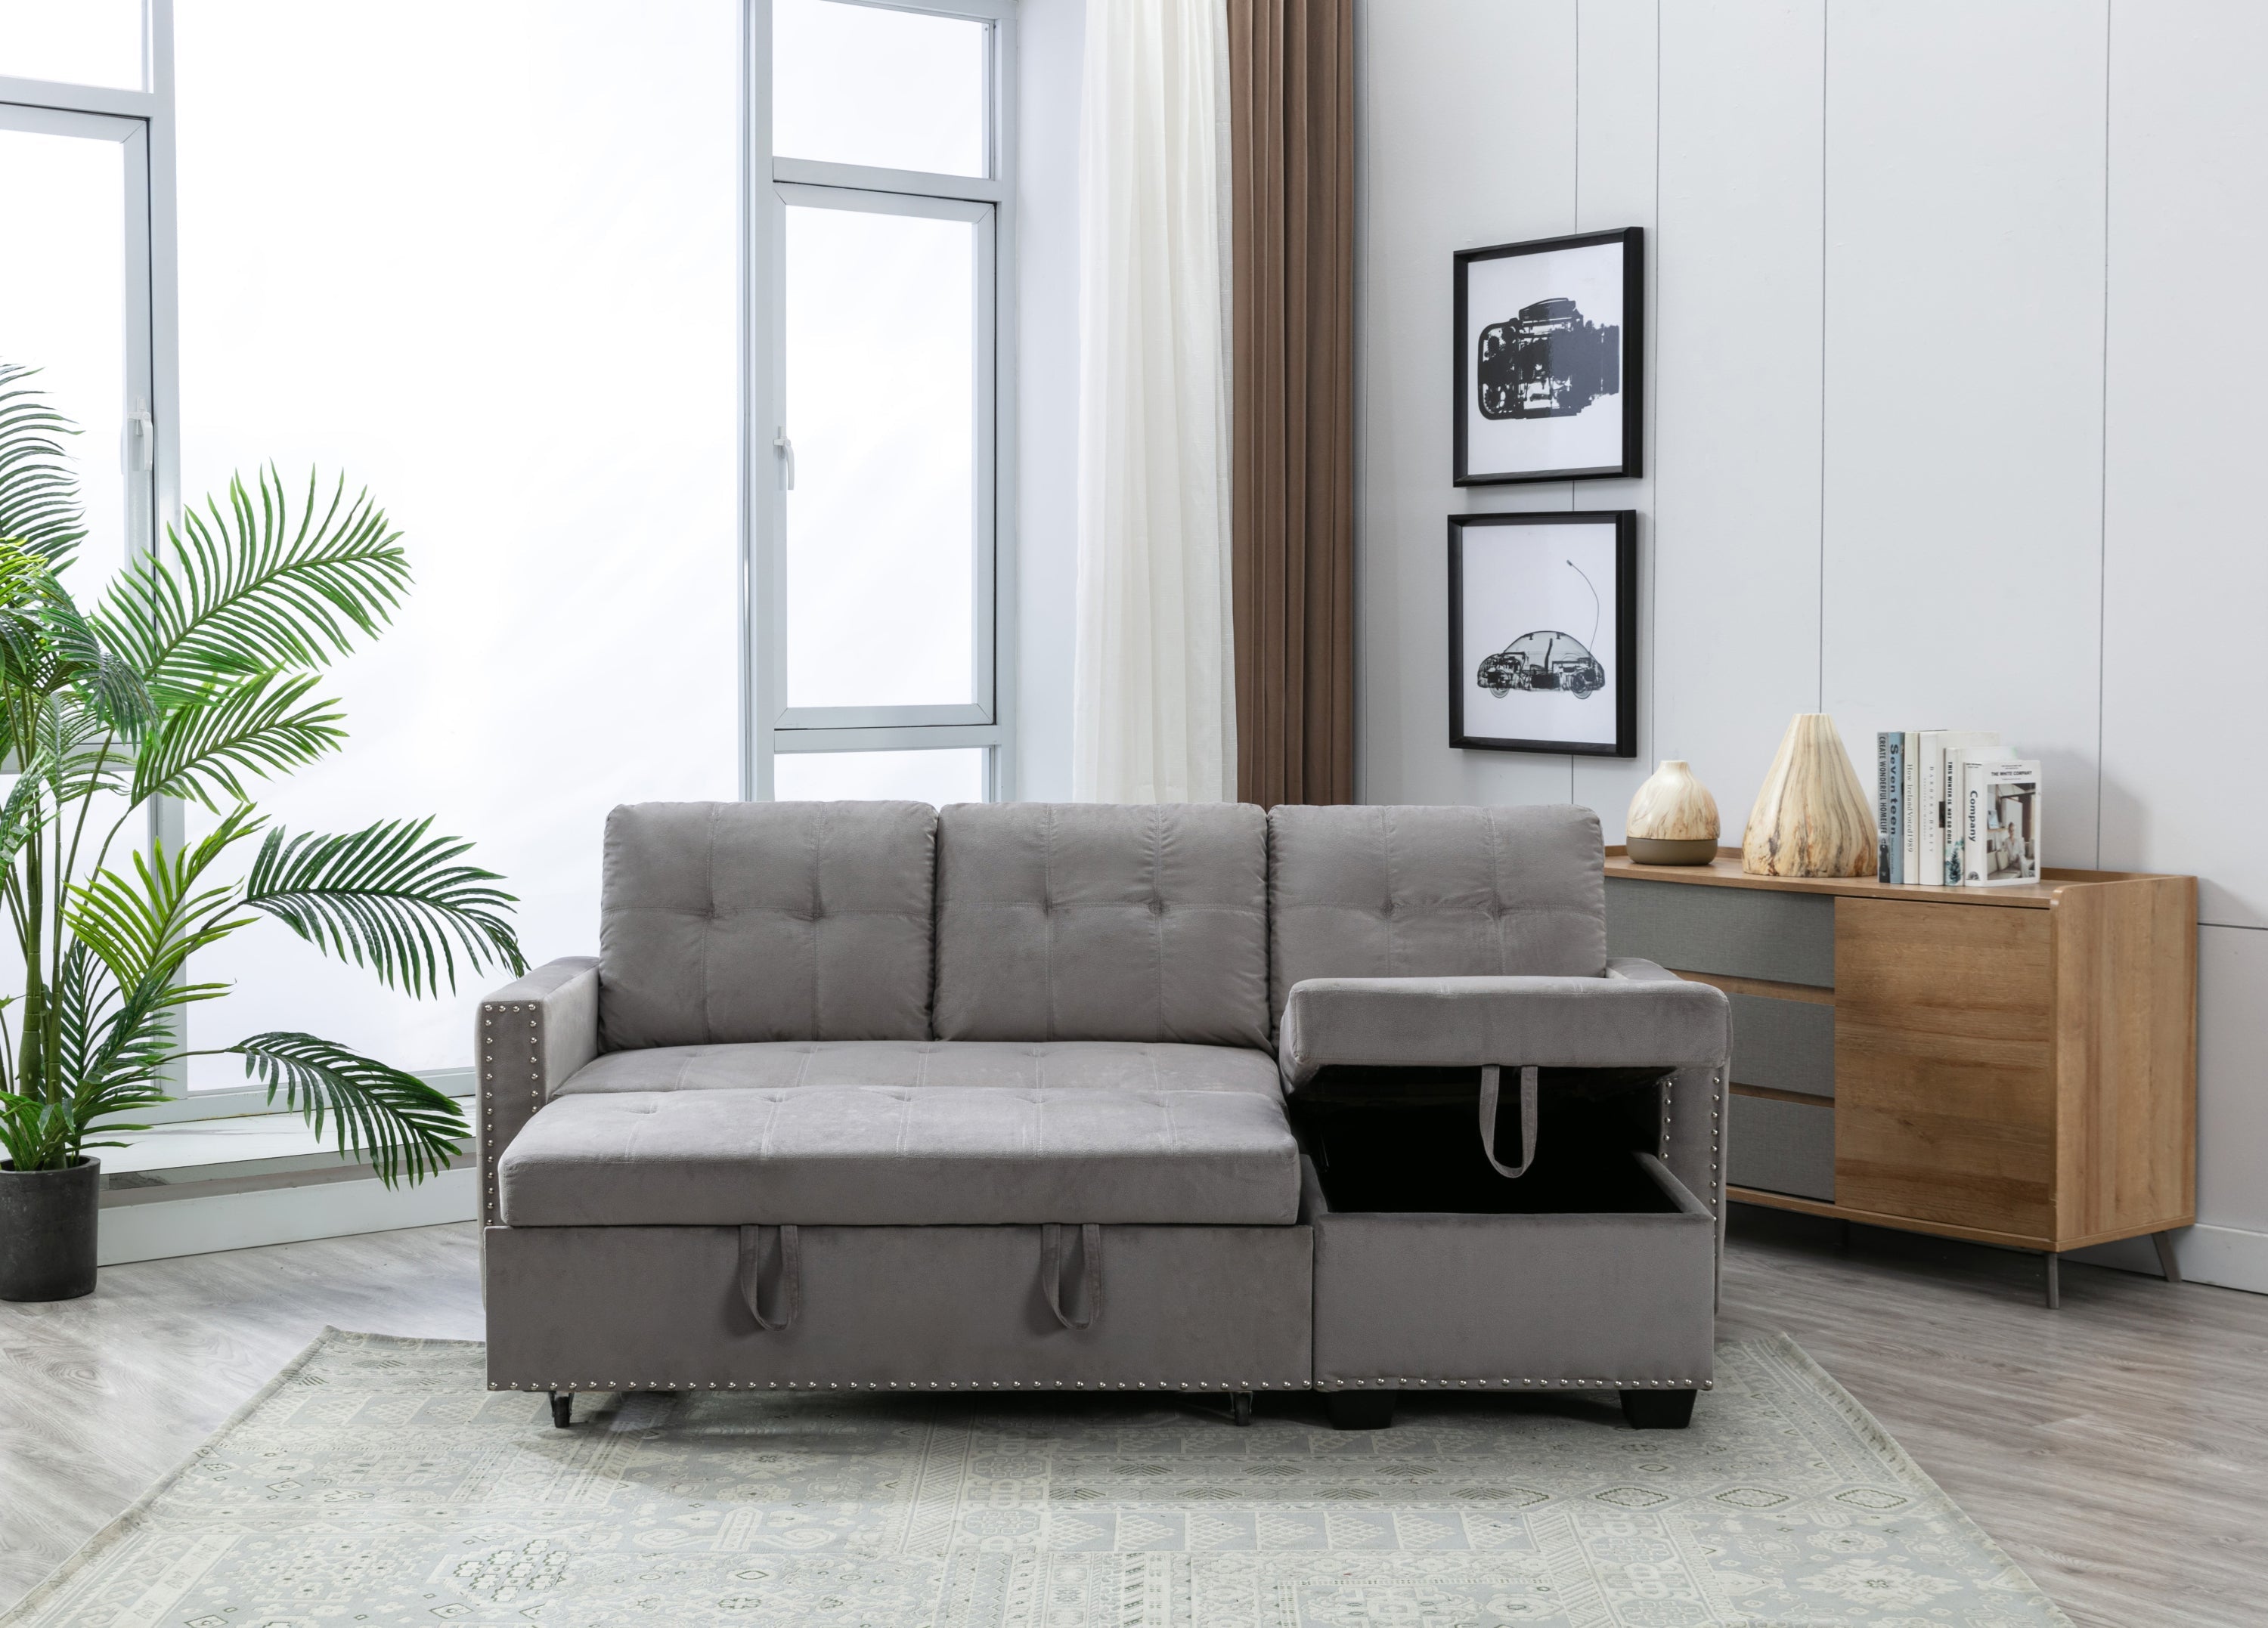 Reversible Sectional Storage Sleeper Sofa Bed | L-Shape 2 Seat Sectional Chaise With Storage | Skin-Feeling Velvet Fabric | Light Grey Color | Stylish Addition to Living Room Furniture-Sleeper Sectionals-American Furniture Outlet